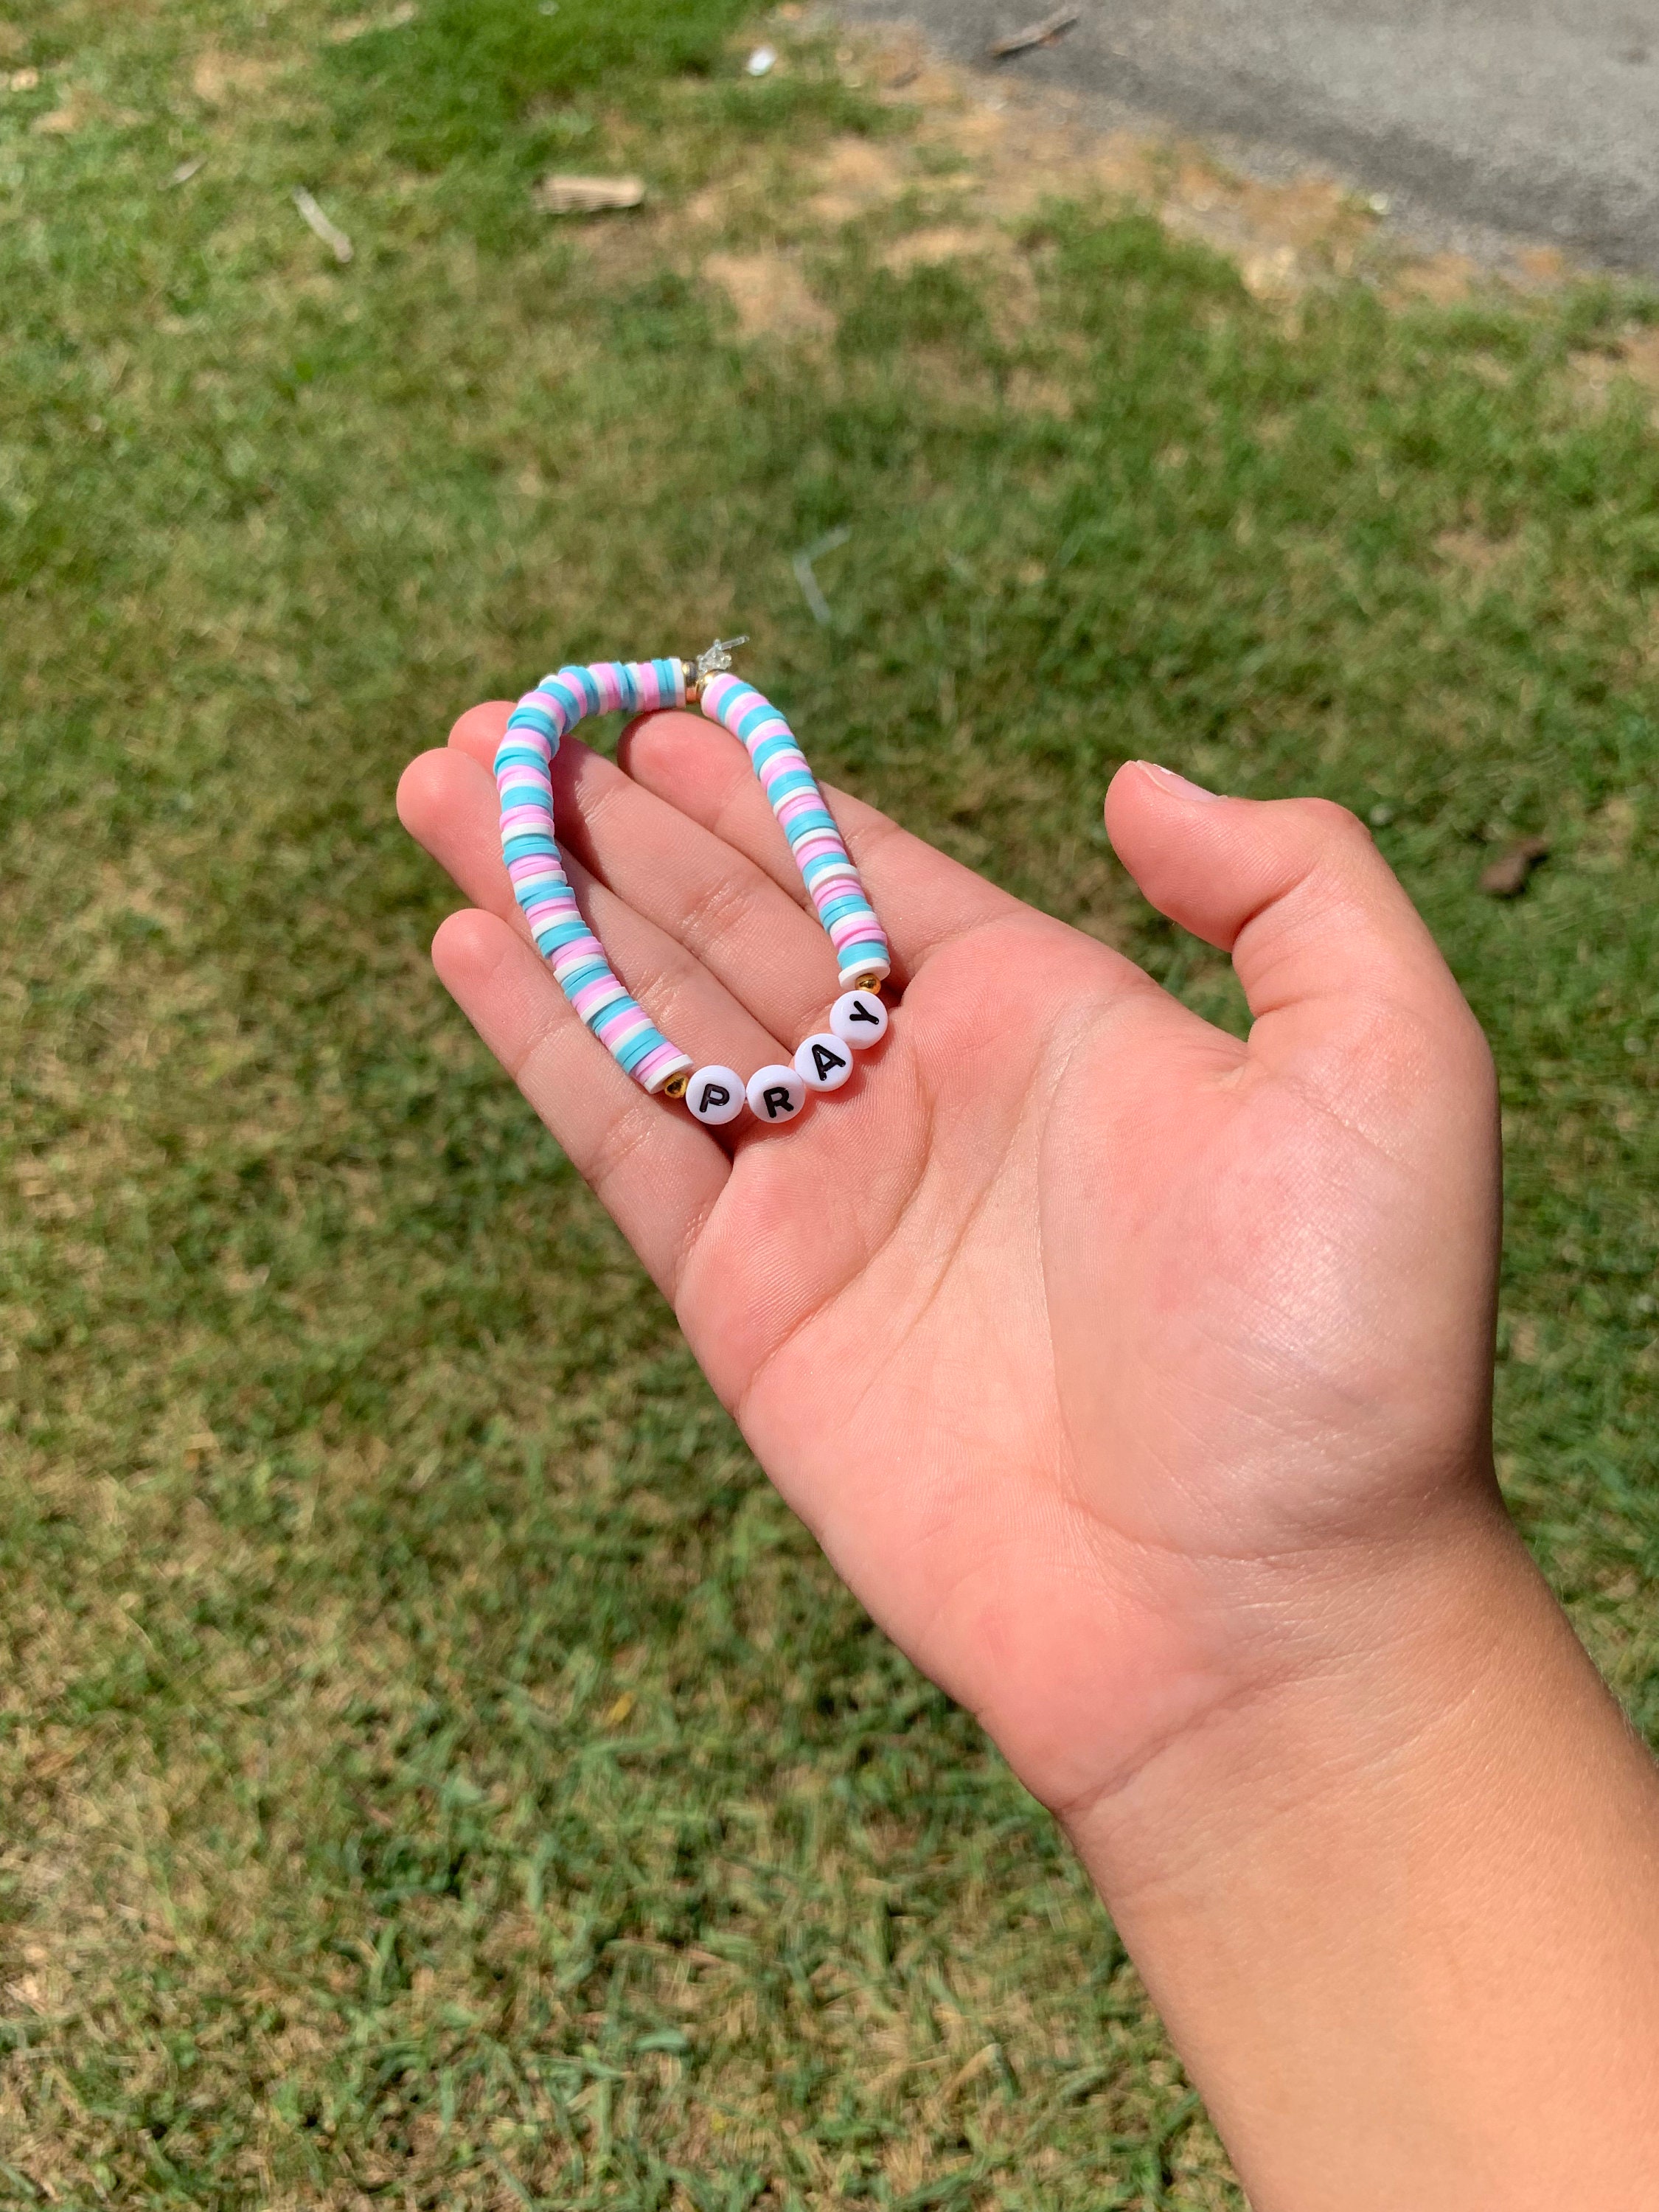 Cotton Candy Dreams Bracelet |polymer Clay beads||stretchy String Made to Fit Every Size wrist